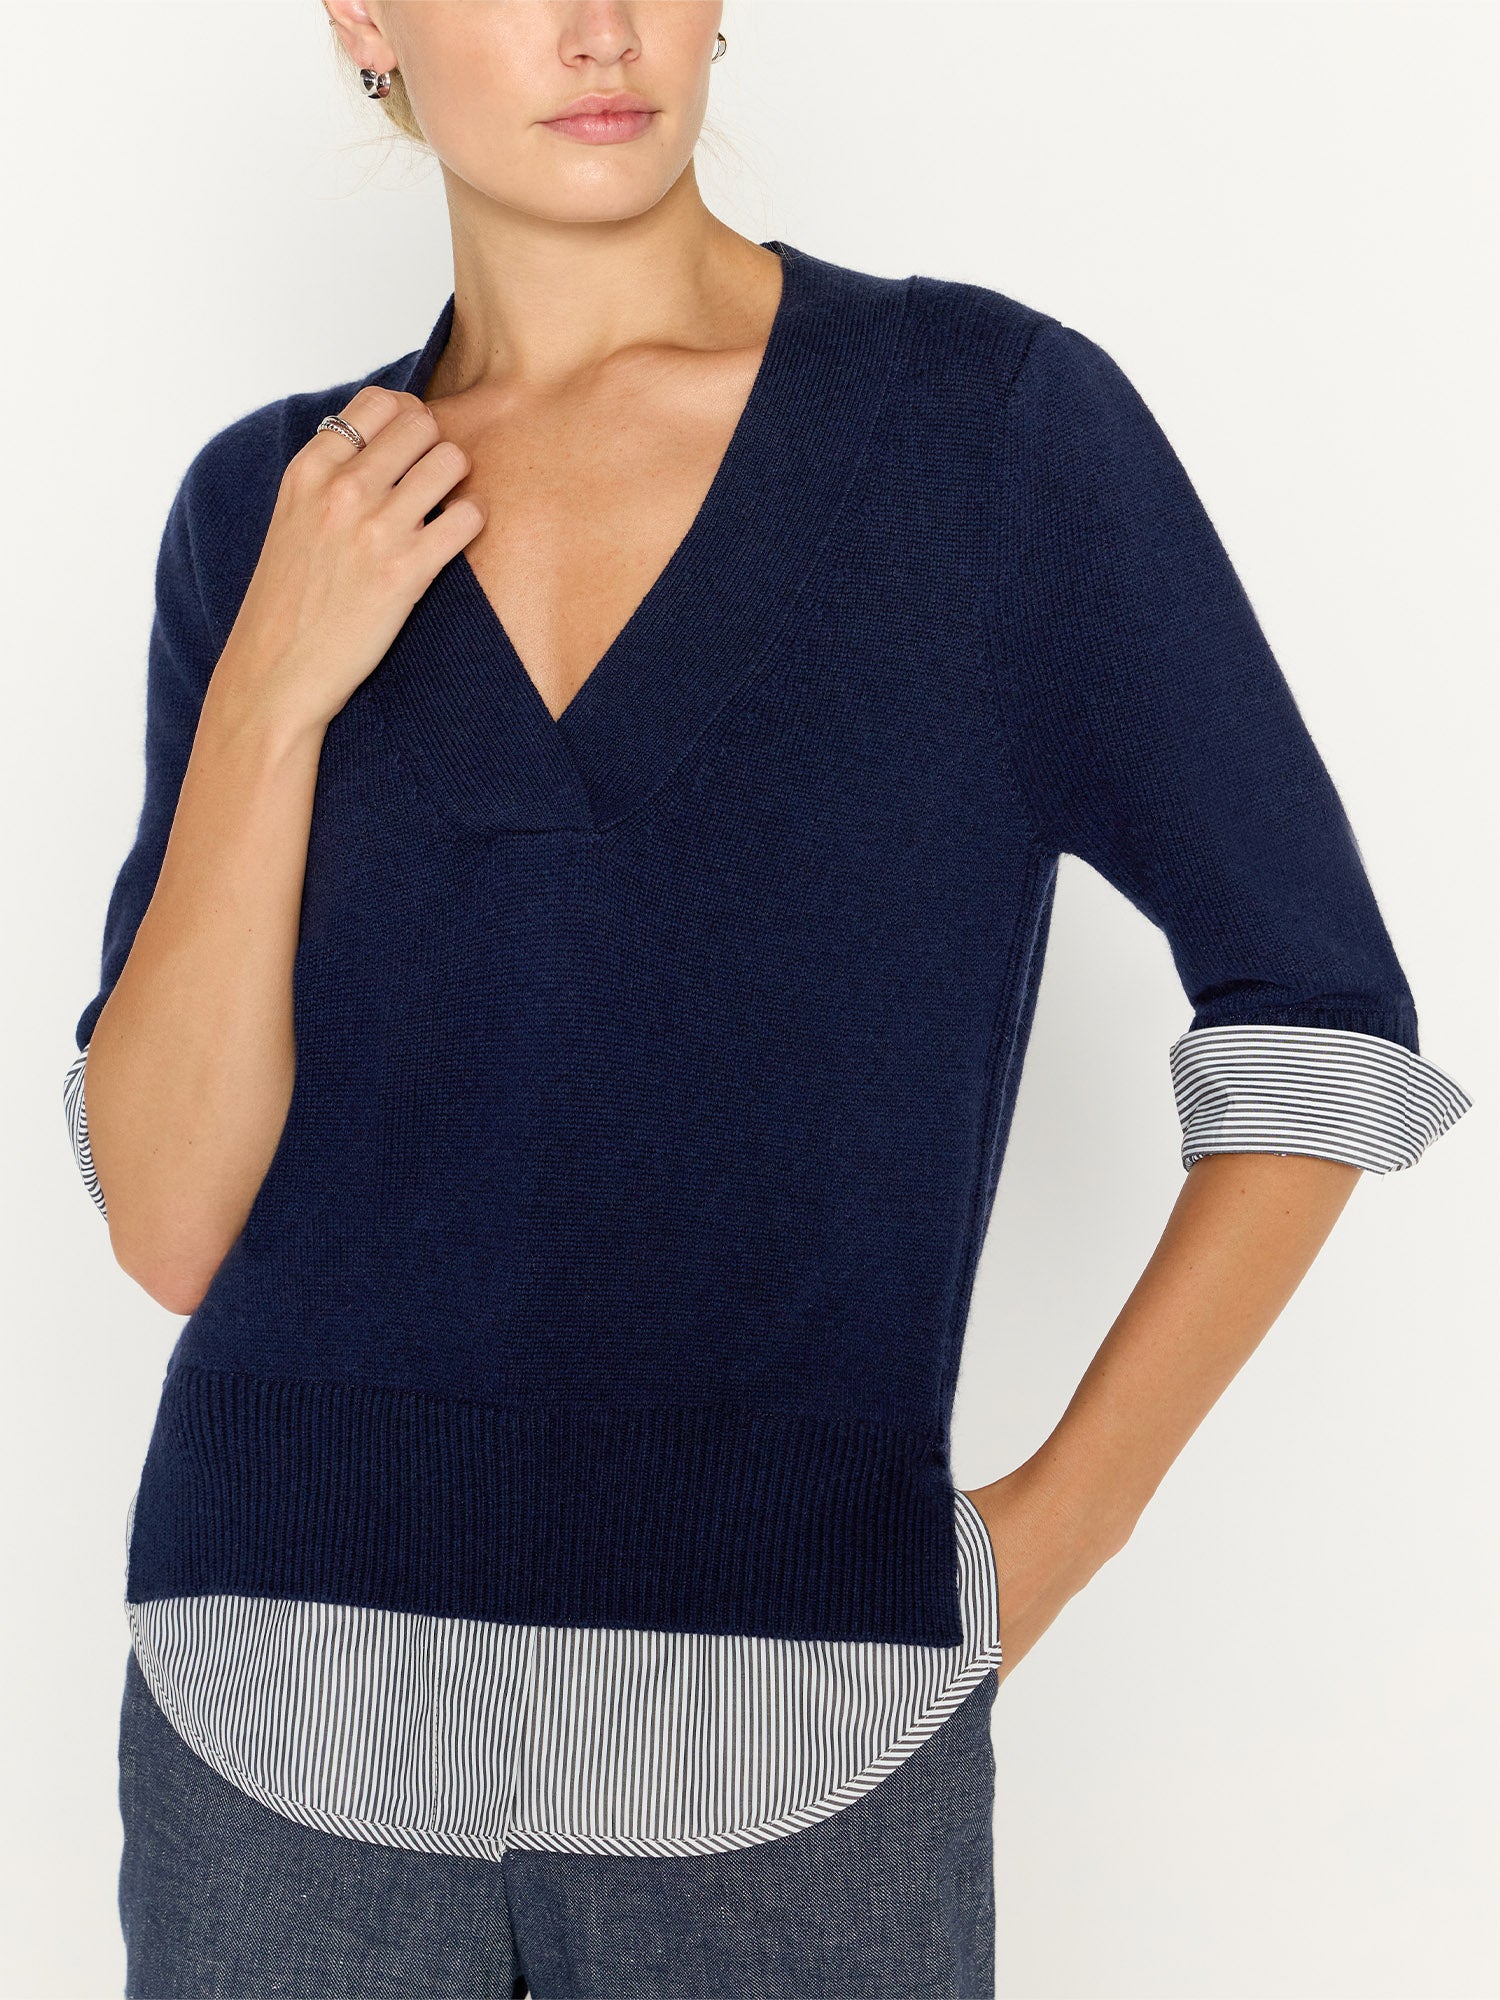 Lucie navy stripe layered three-quarter sleeve v-neck sweater front view 2